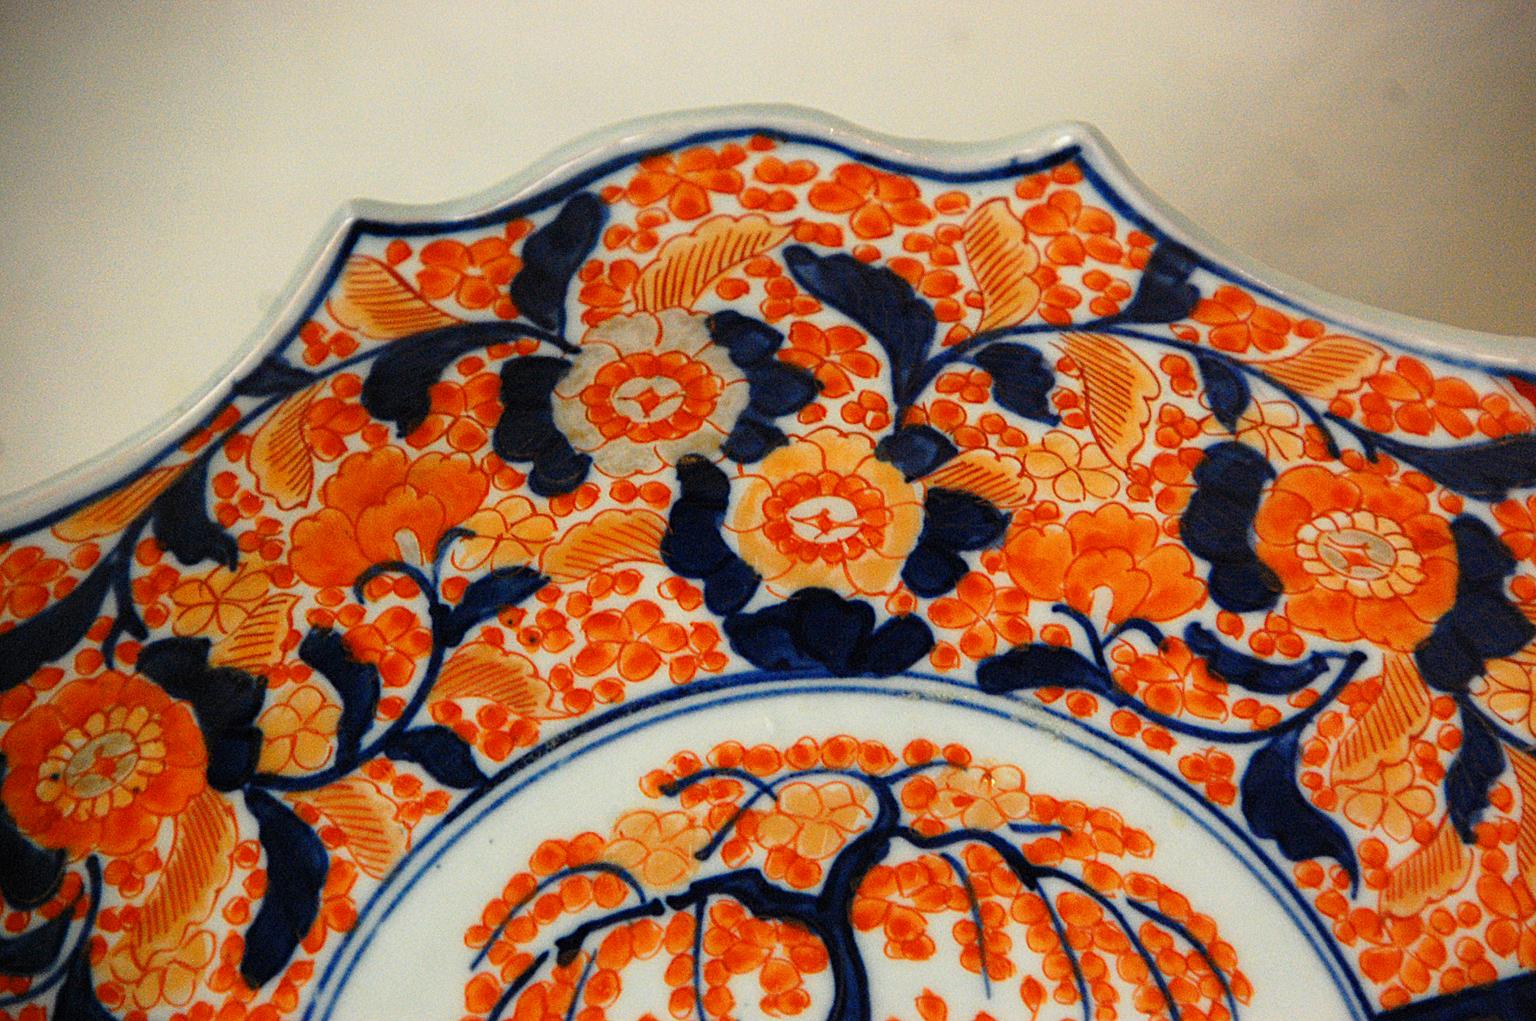 Japanese 19th century Meiji period Imari 12 inch charger. This unusually shaped charger is hand painted with underglaze blue and overglaze enamels highlighted by gold leaf detailing. The central panel is populated by a jardinière filled with a